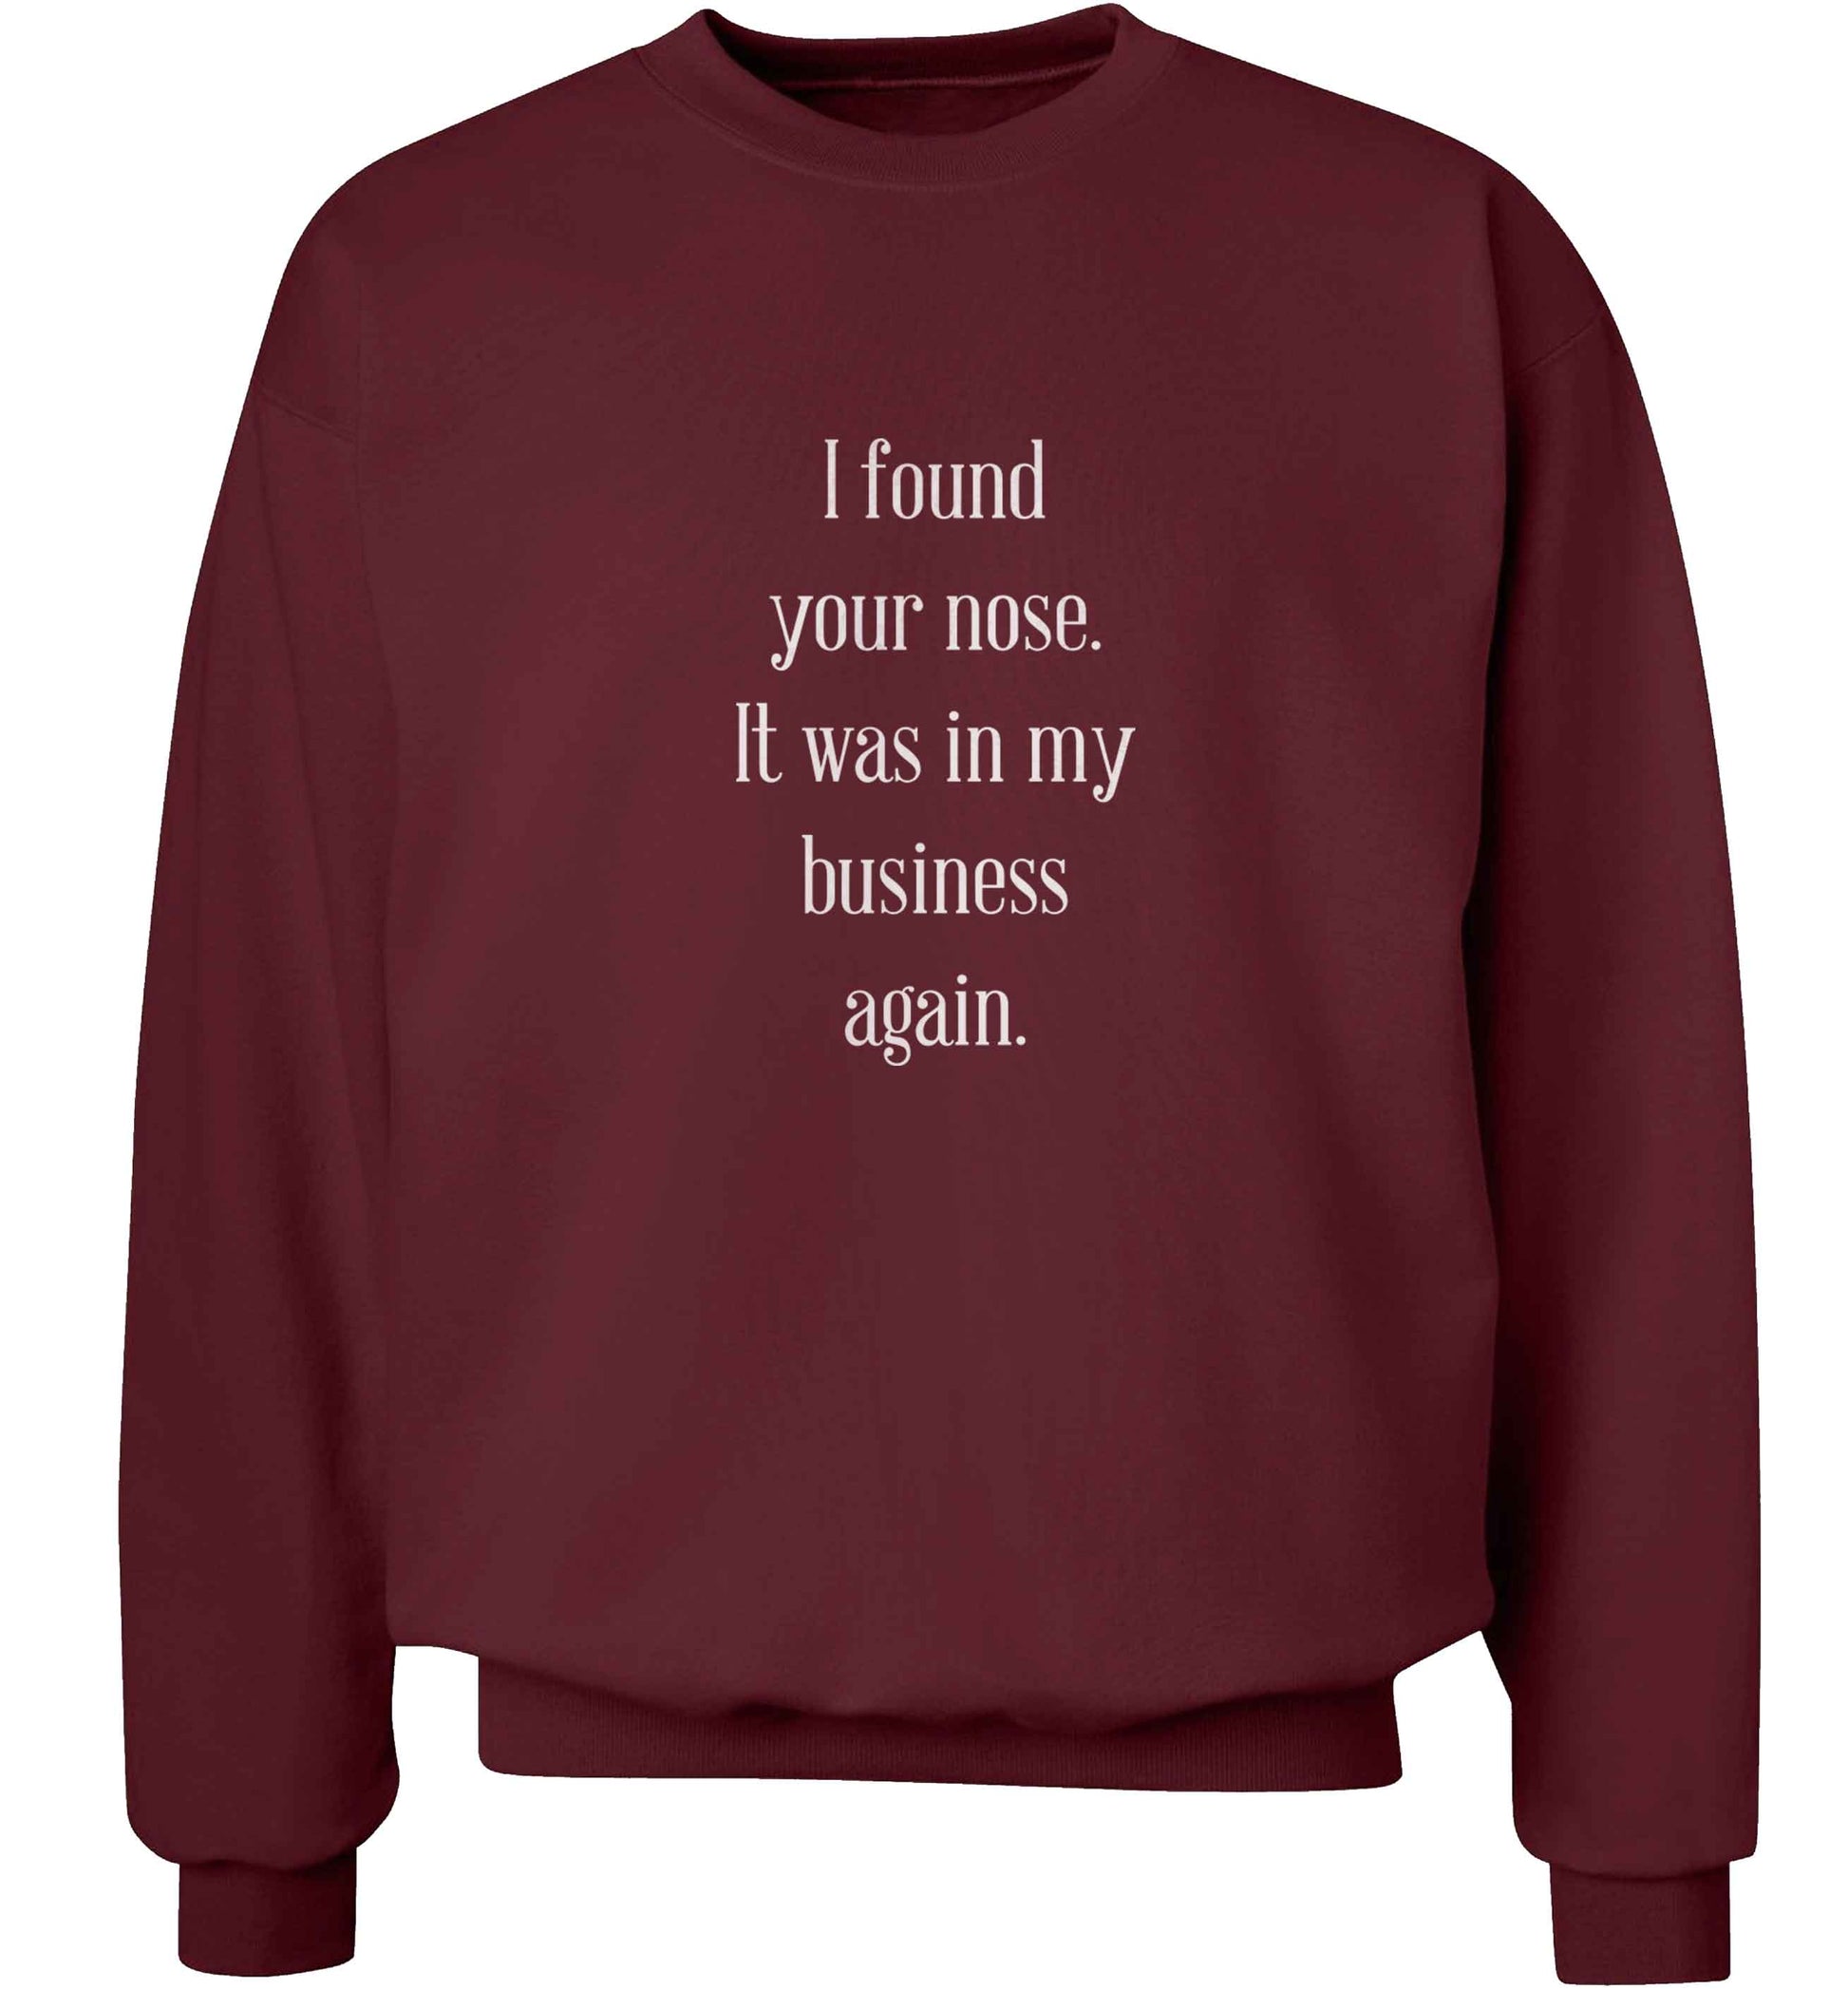 I found your nose it was in my business again adult's unisex maroon sweater 2XL